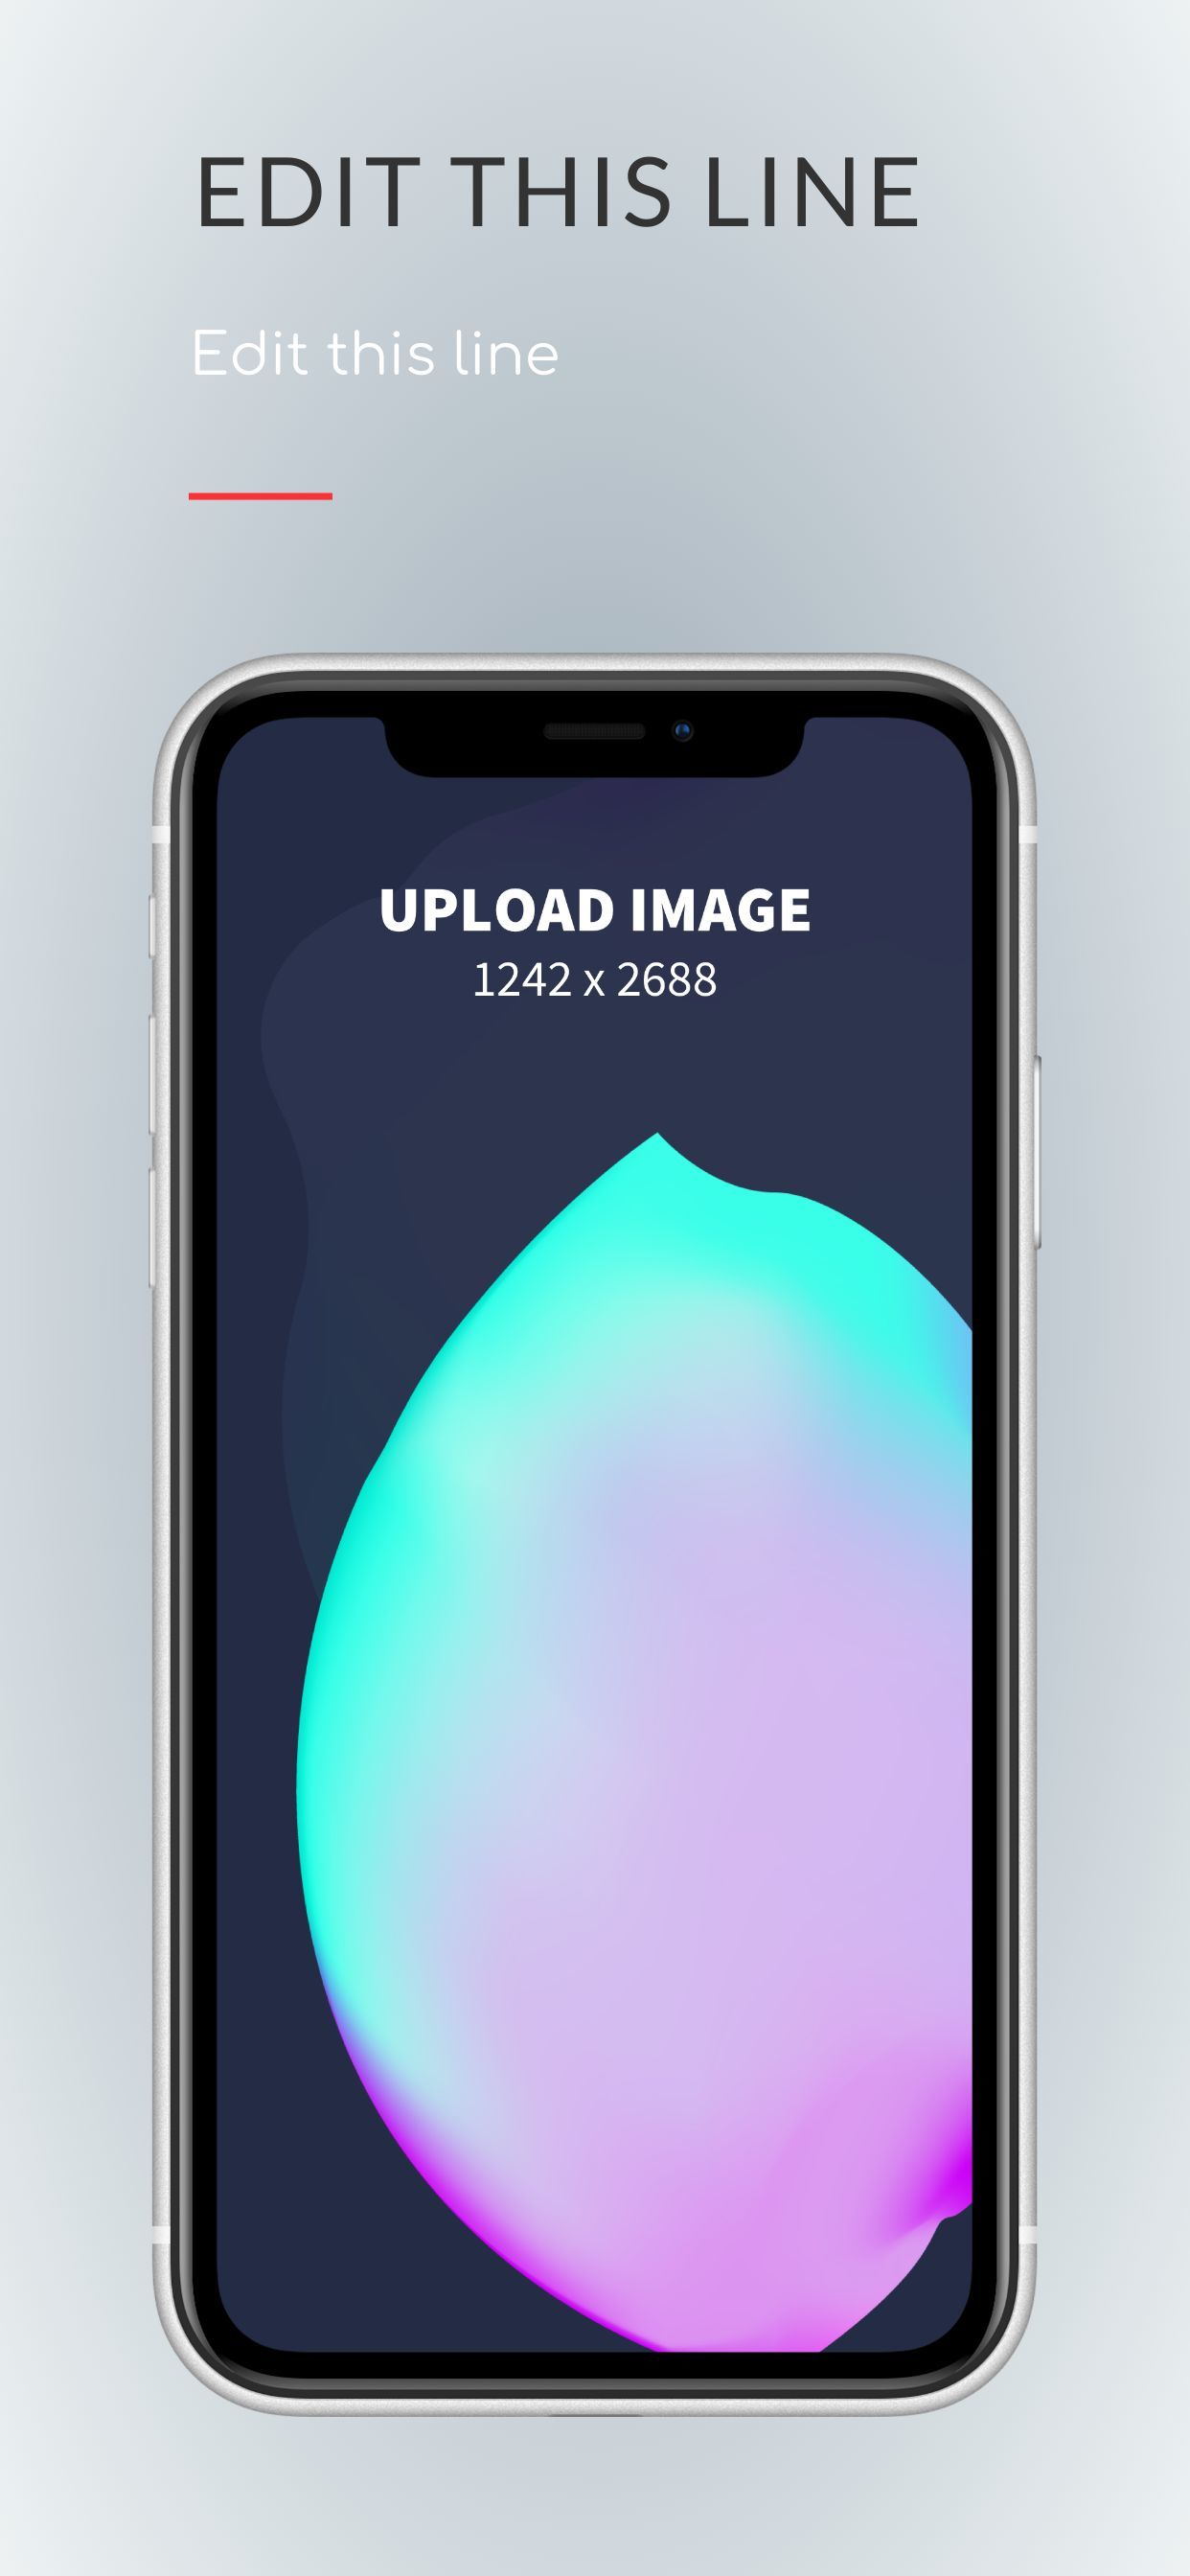 iPhone XS Max Screenshot 5 template. Quickly edit text, colors, images, and more for free.